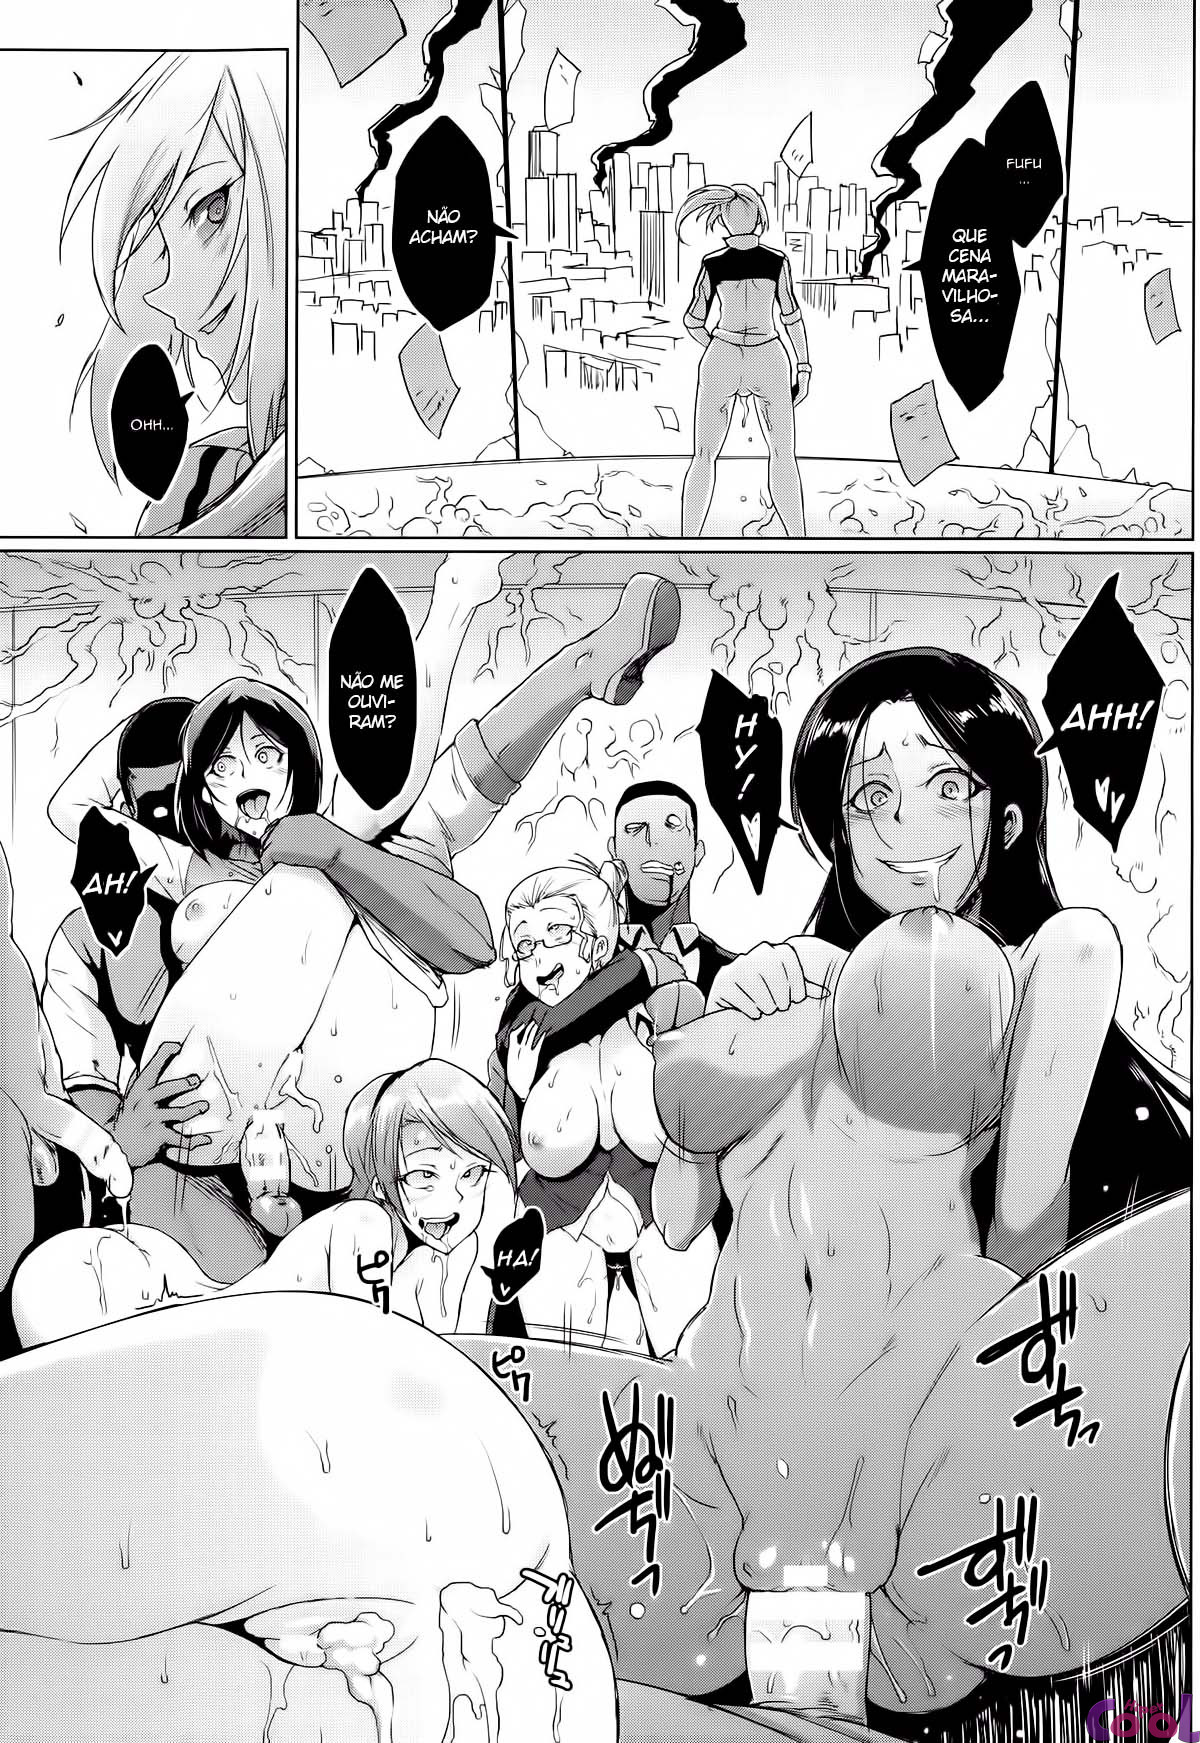 the-voodoo-squad-kouhen-chapter-01-page-11.jpg